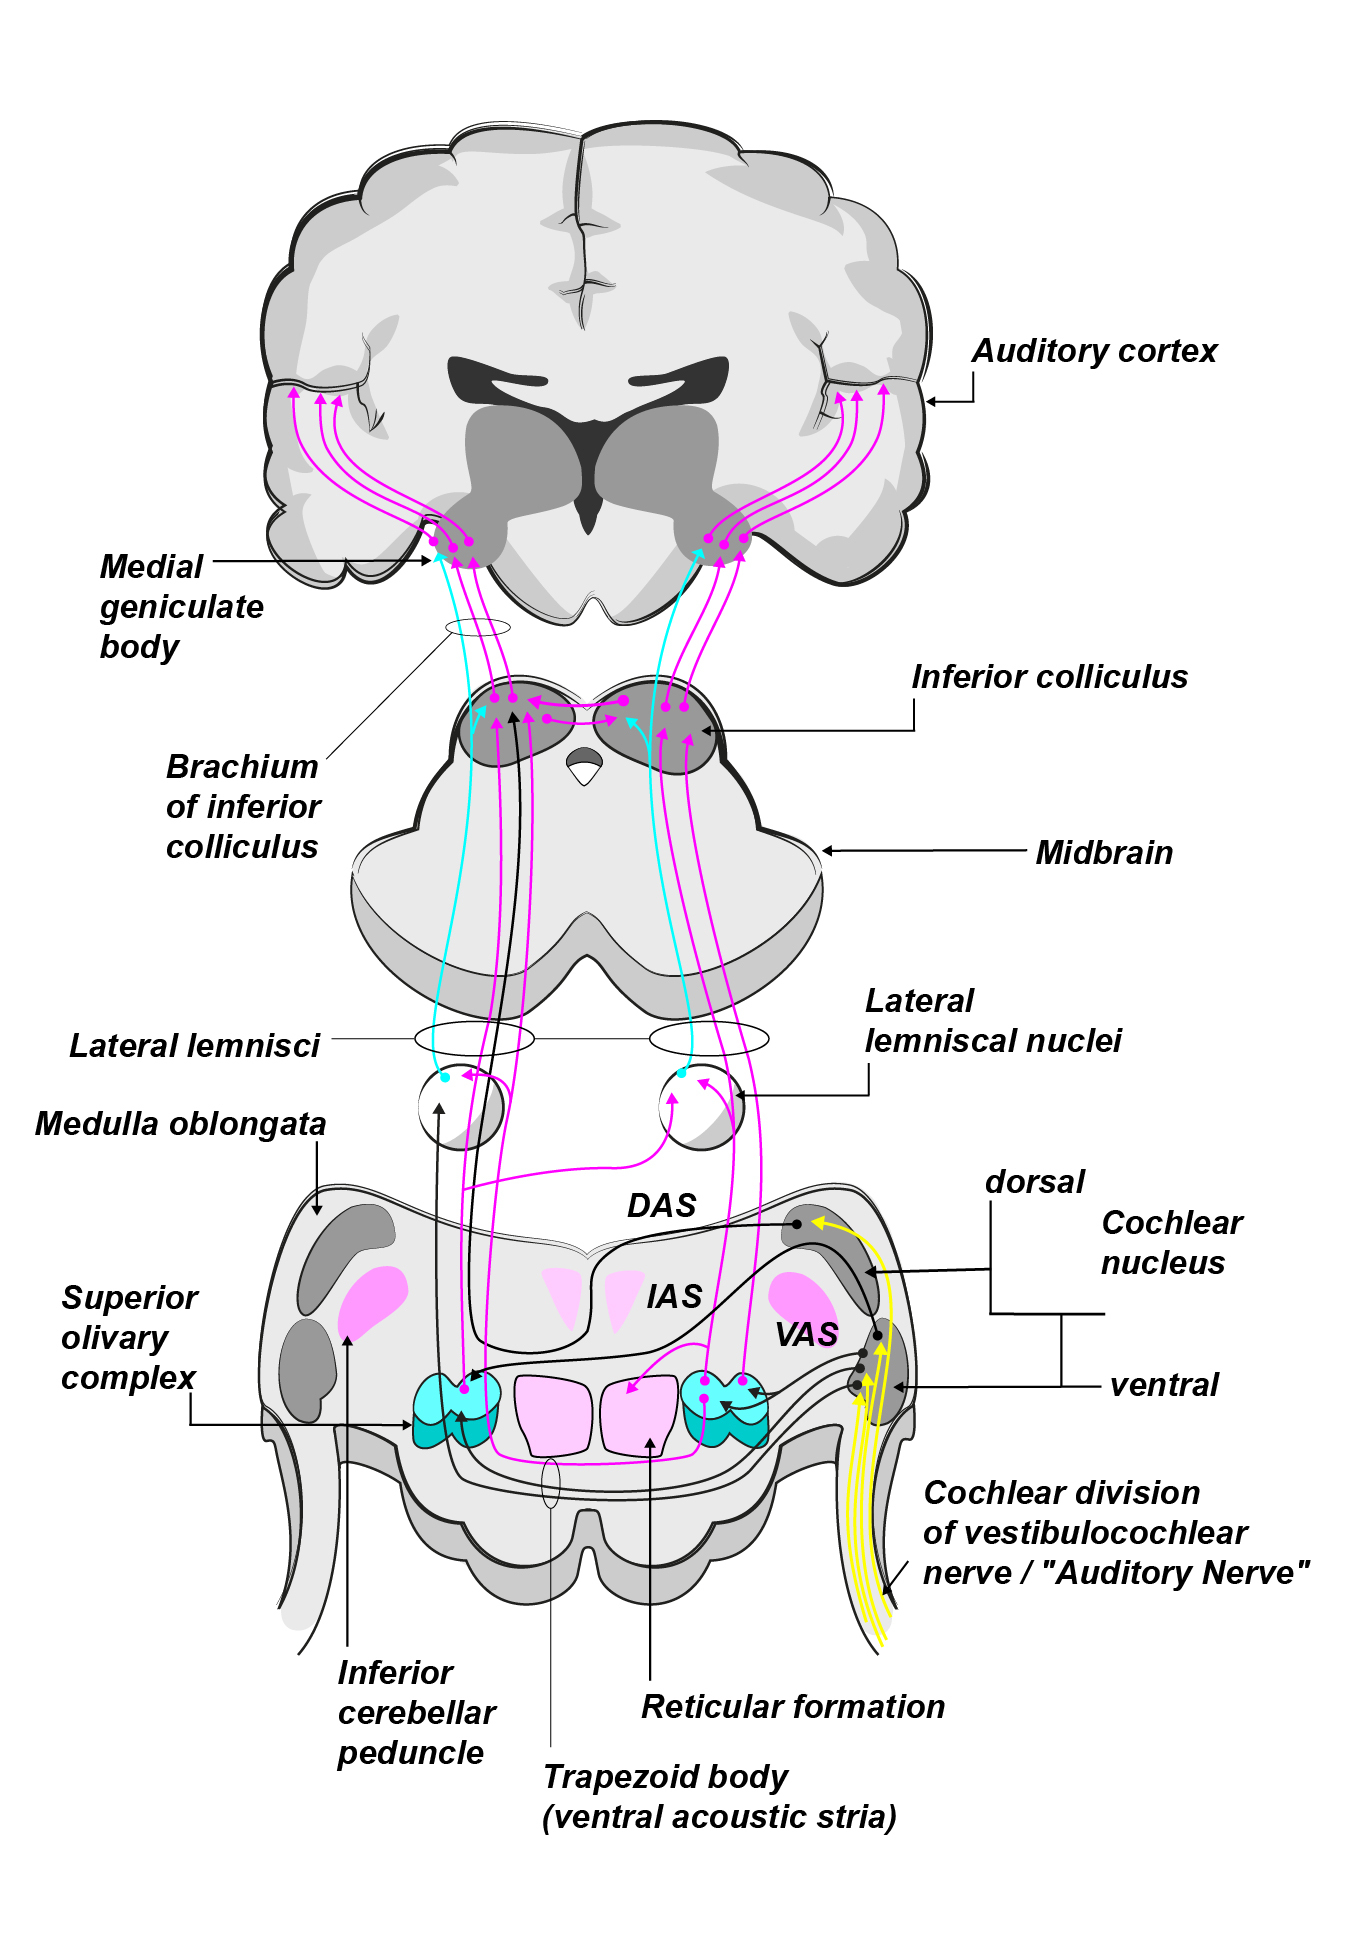 auditory pathway steps